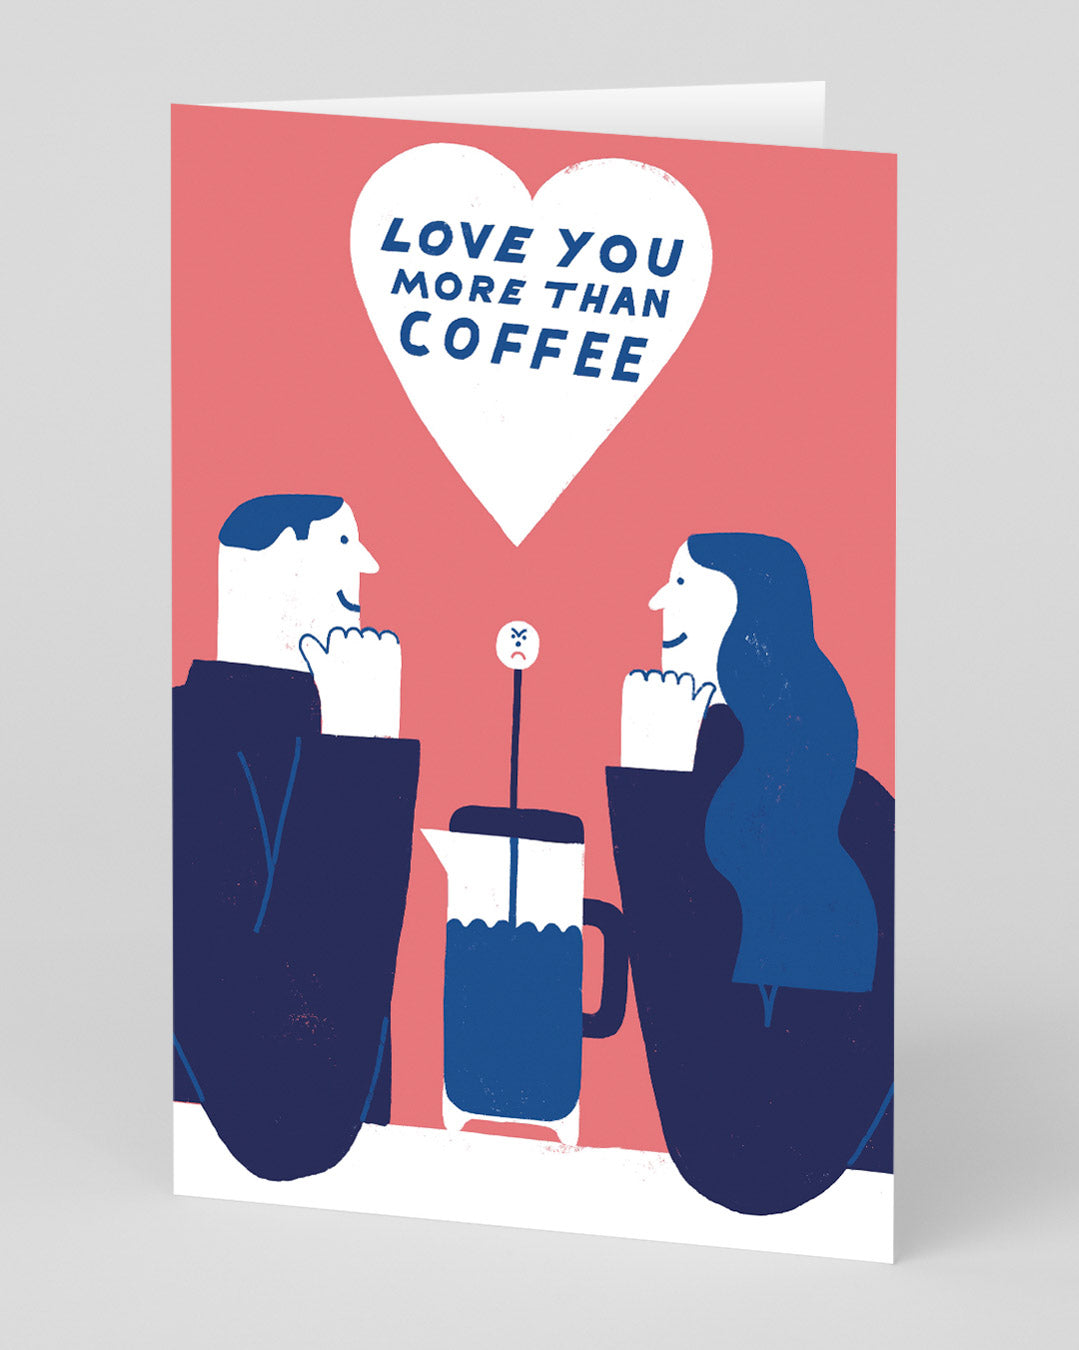 Valentine’s Day | Funny Valentines Card For Coffee Lovers | Personalised Love You More Than Coffee Card | Ohh Deer Unique Valentine’s Card for Him or Her | Artwork by Max Machen | Made In The UK, Eco-Friendly Materials, Plastic Free Packaging